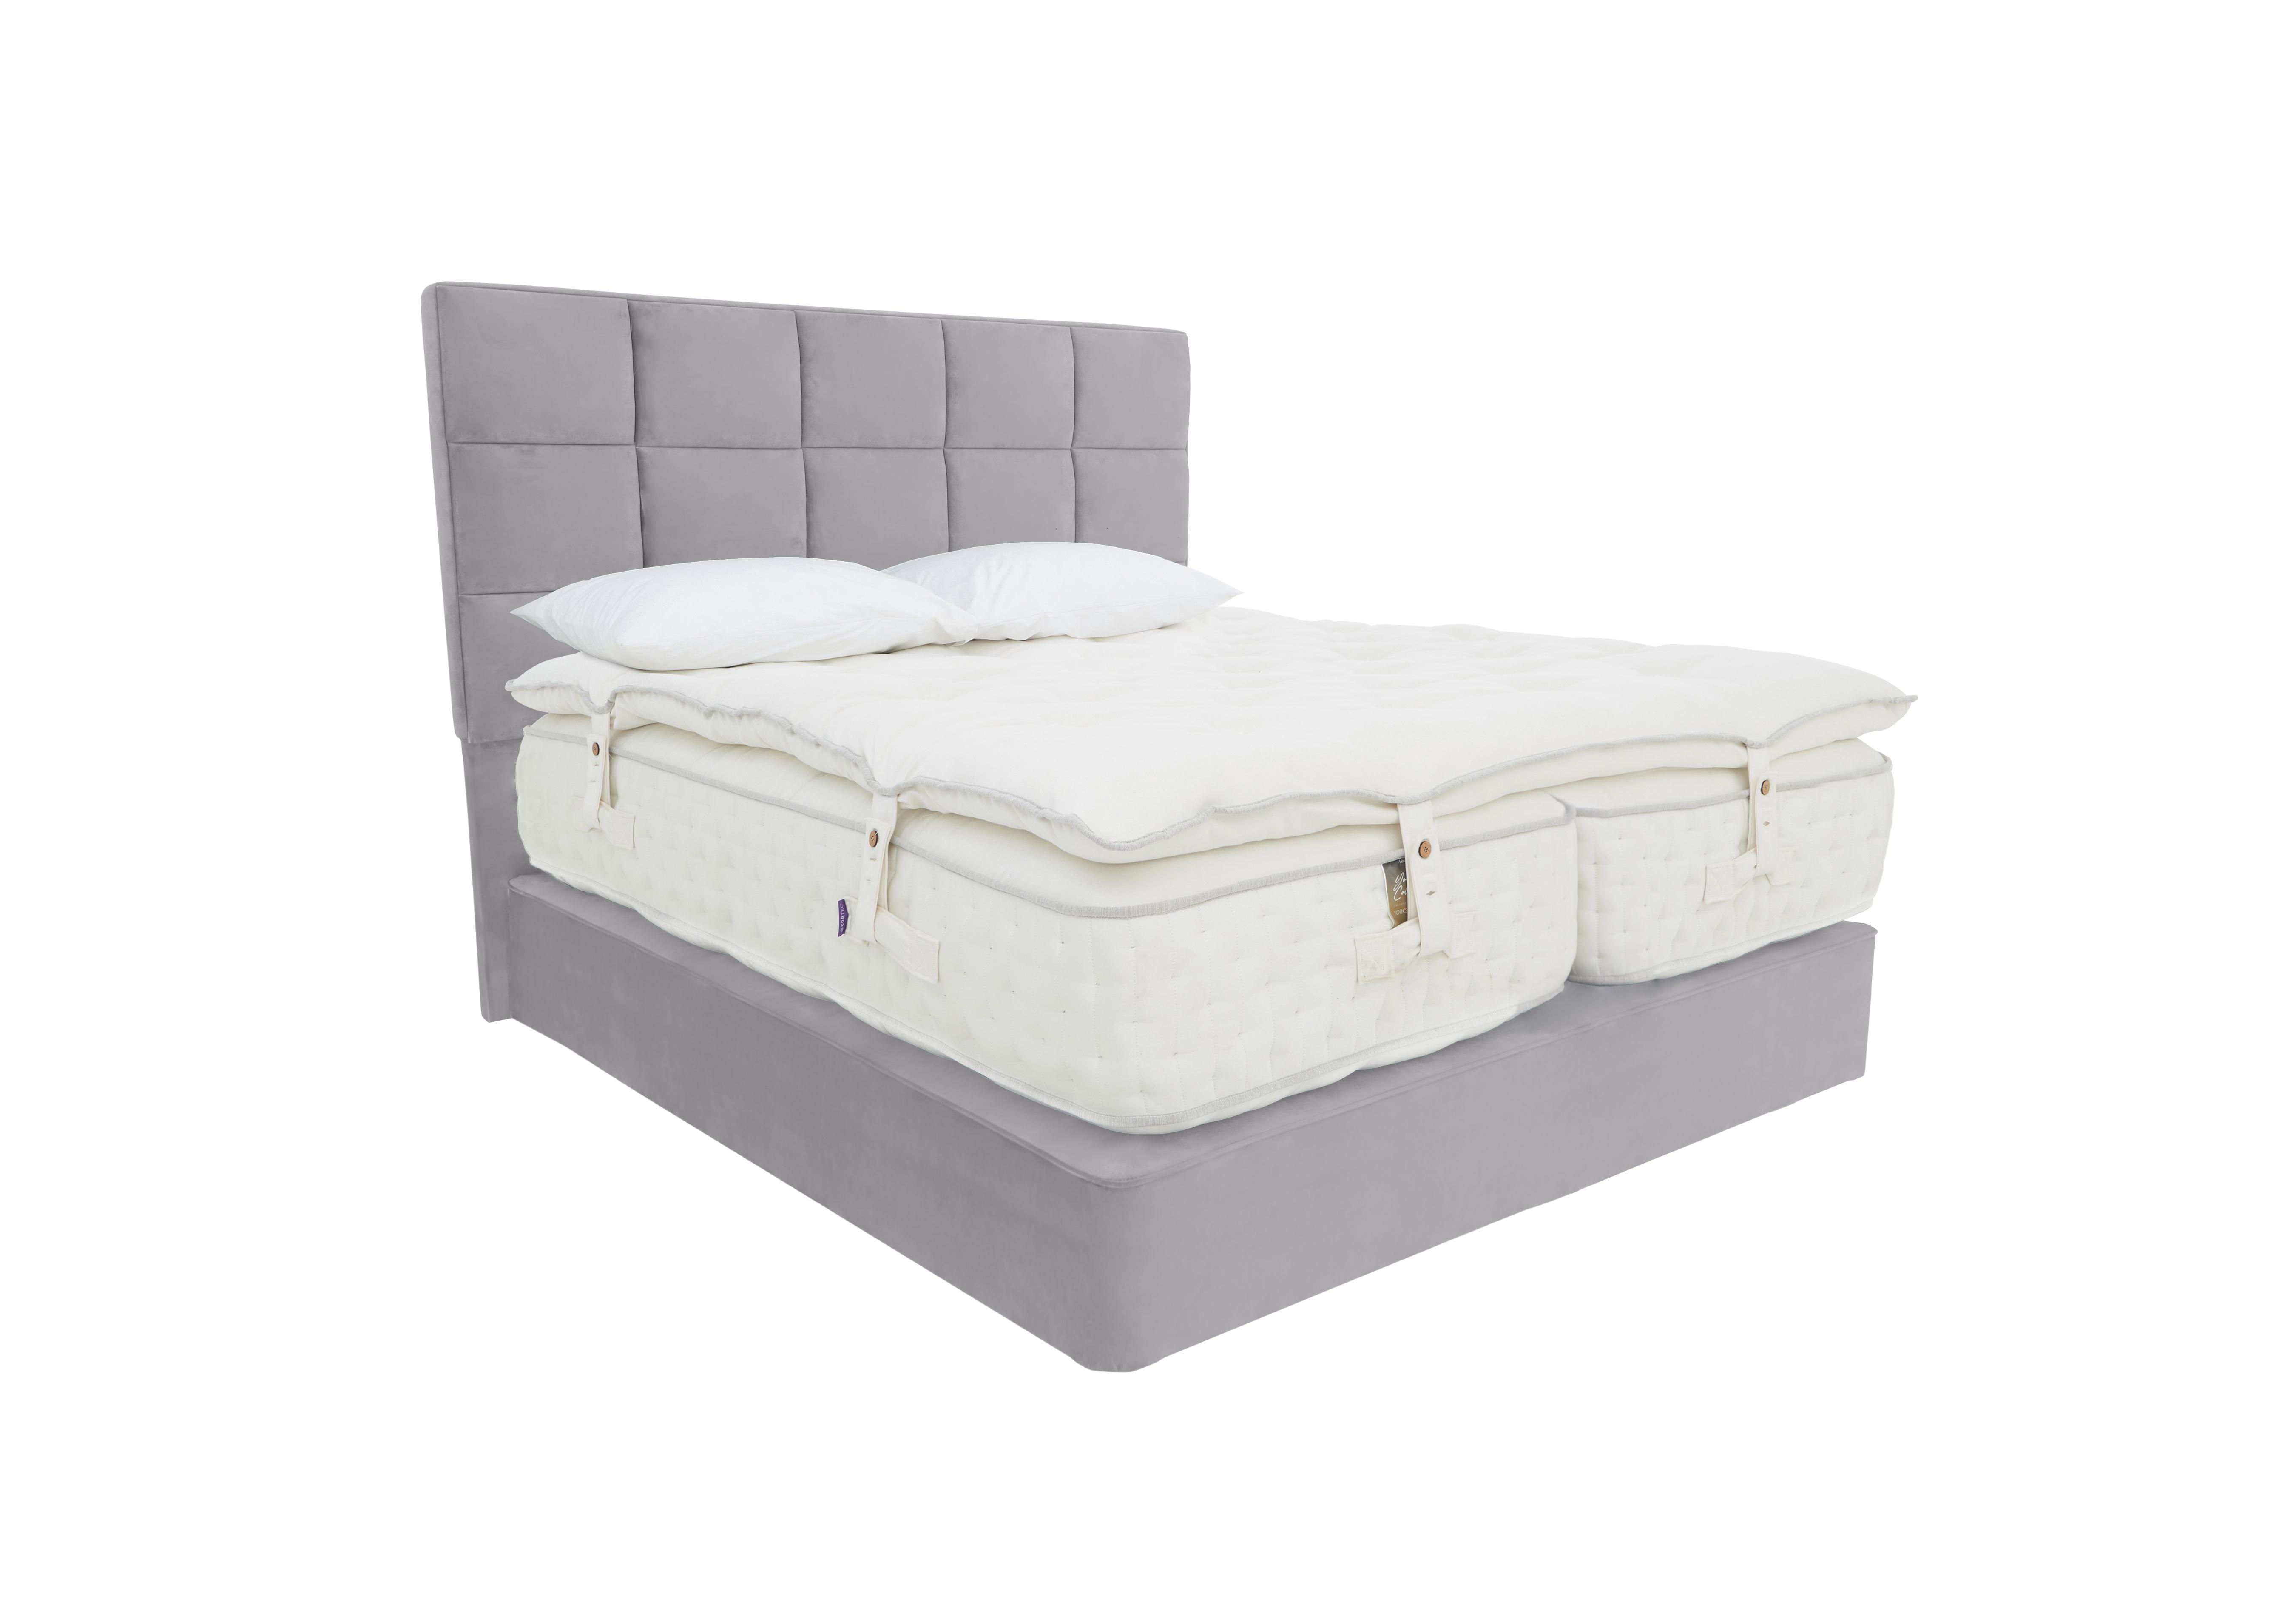 Yorkshire 30K Divan Set with Zip and Link Mattress with Mattress Topper in Seven Lilac on Furniture Village